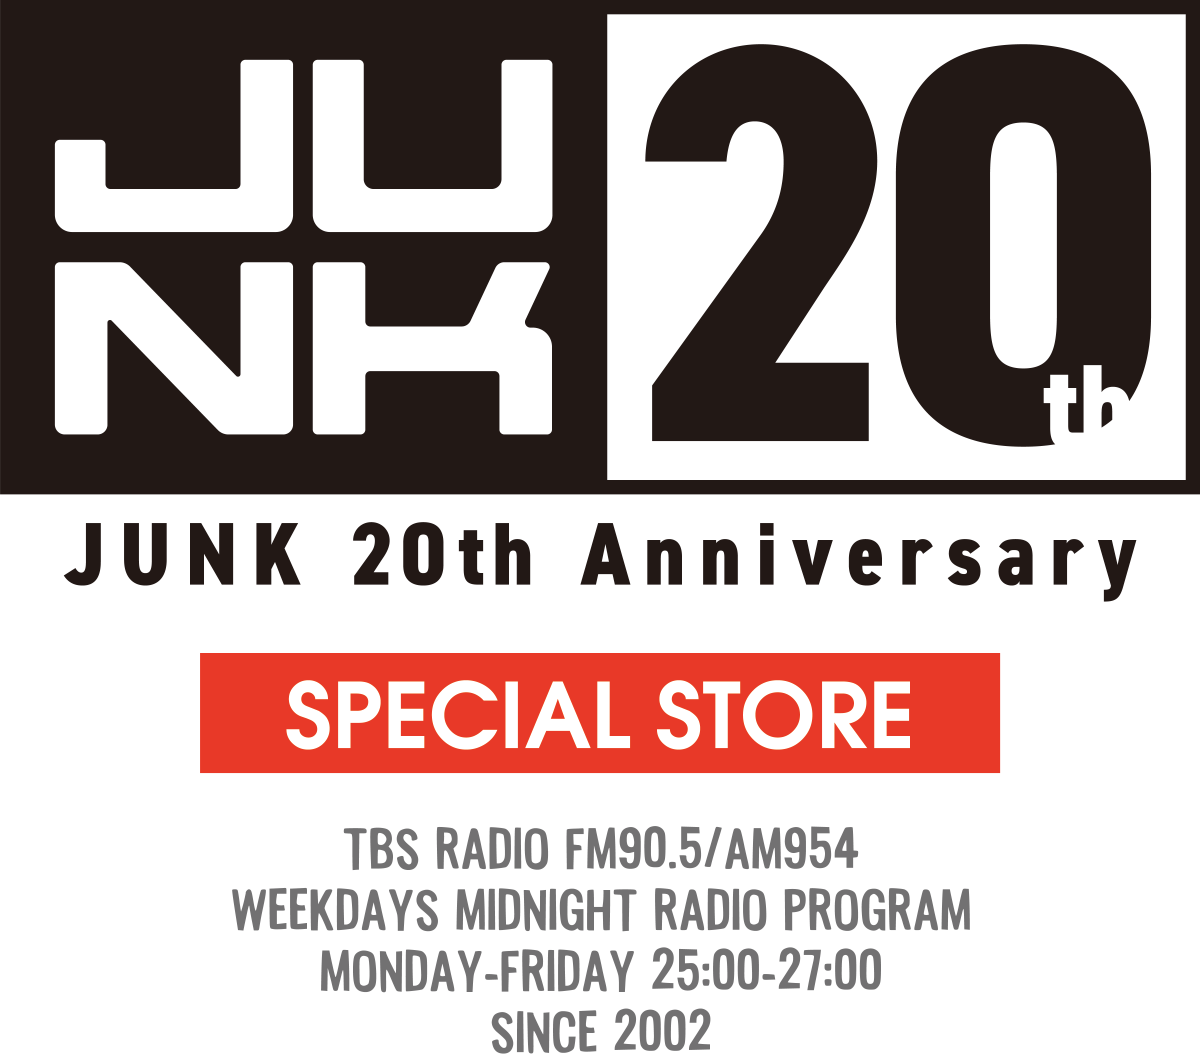 JUNK 20th Anniversary SPECIAL STORE